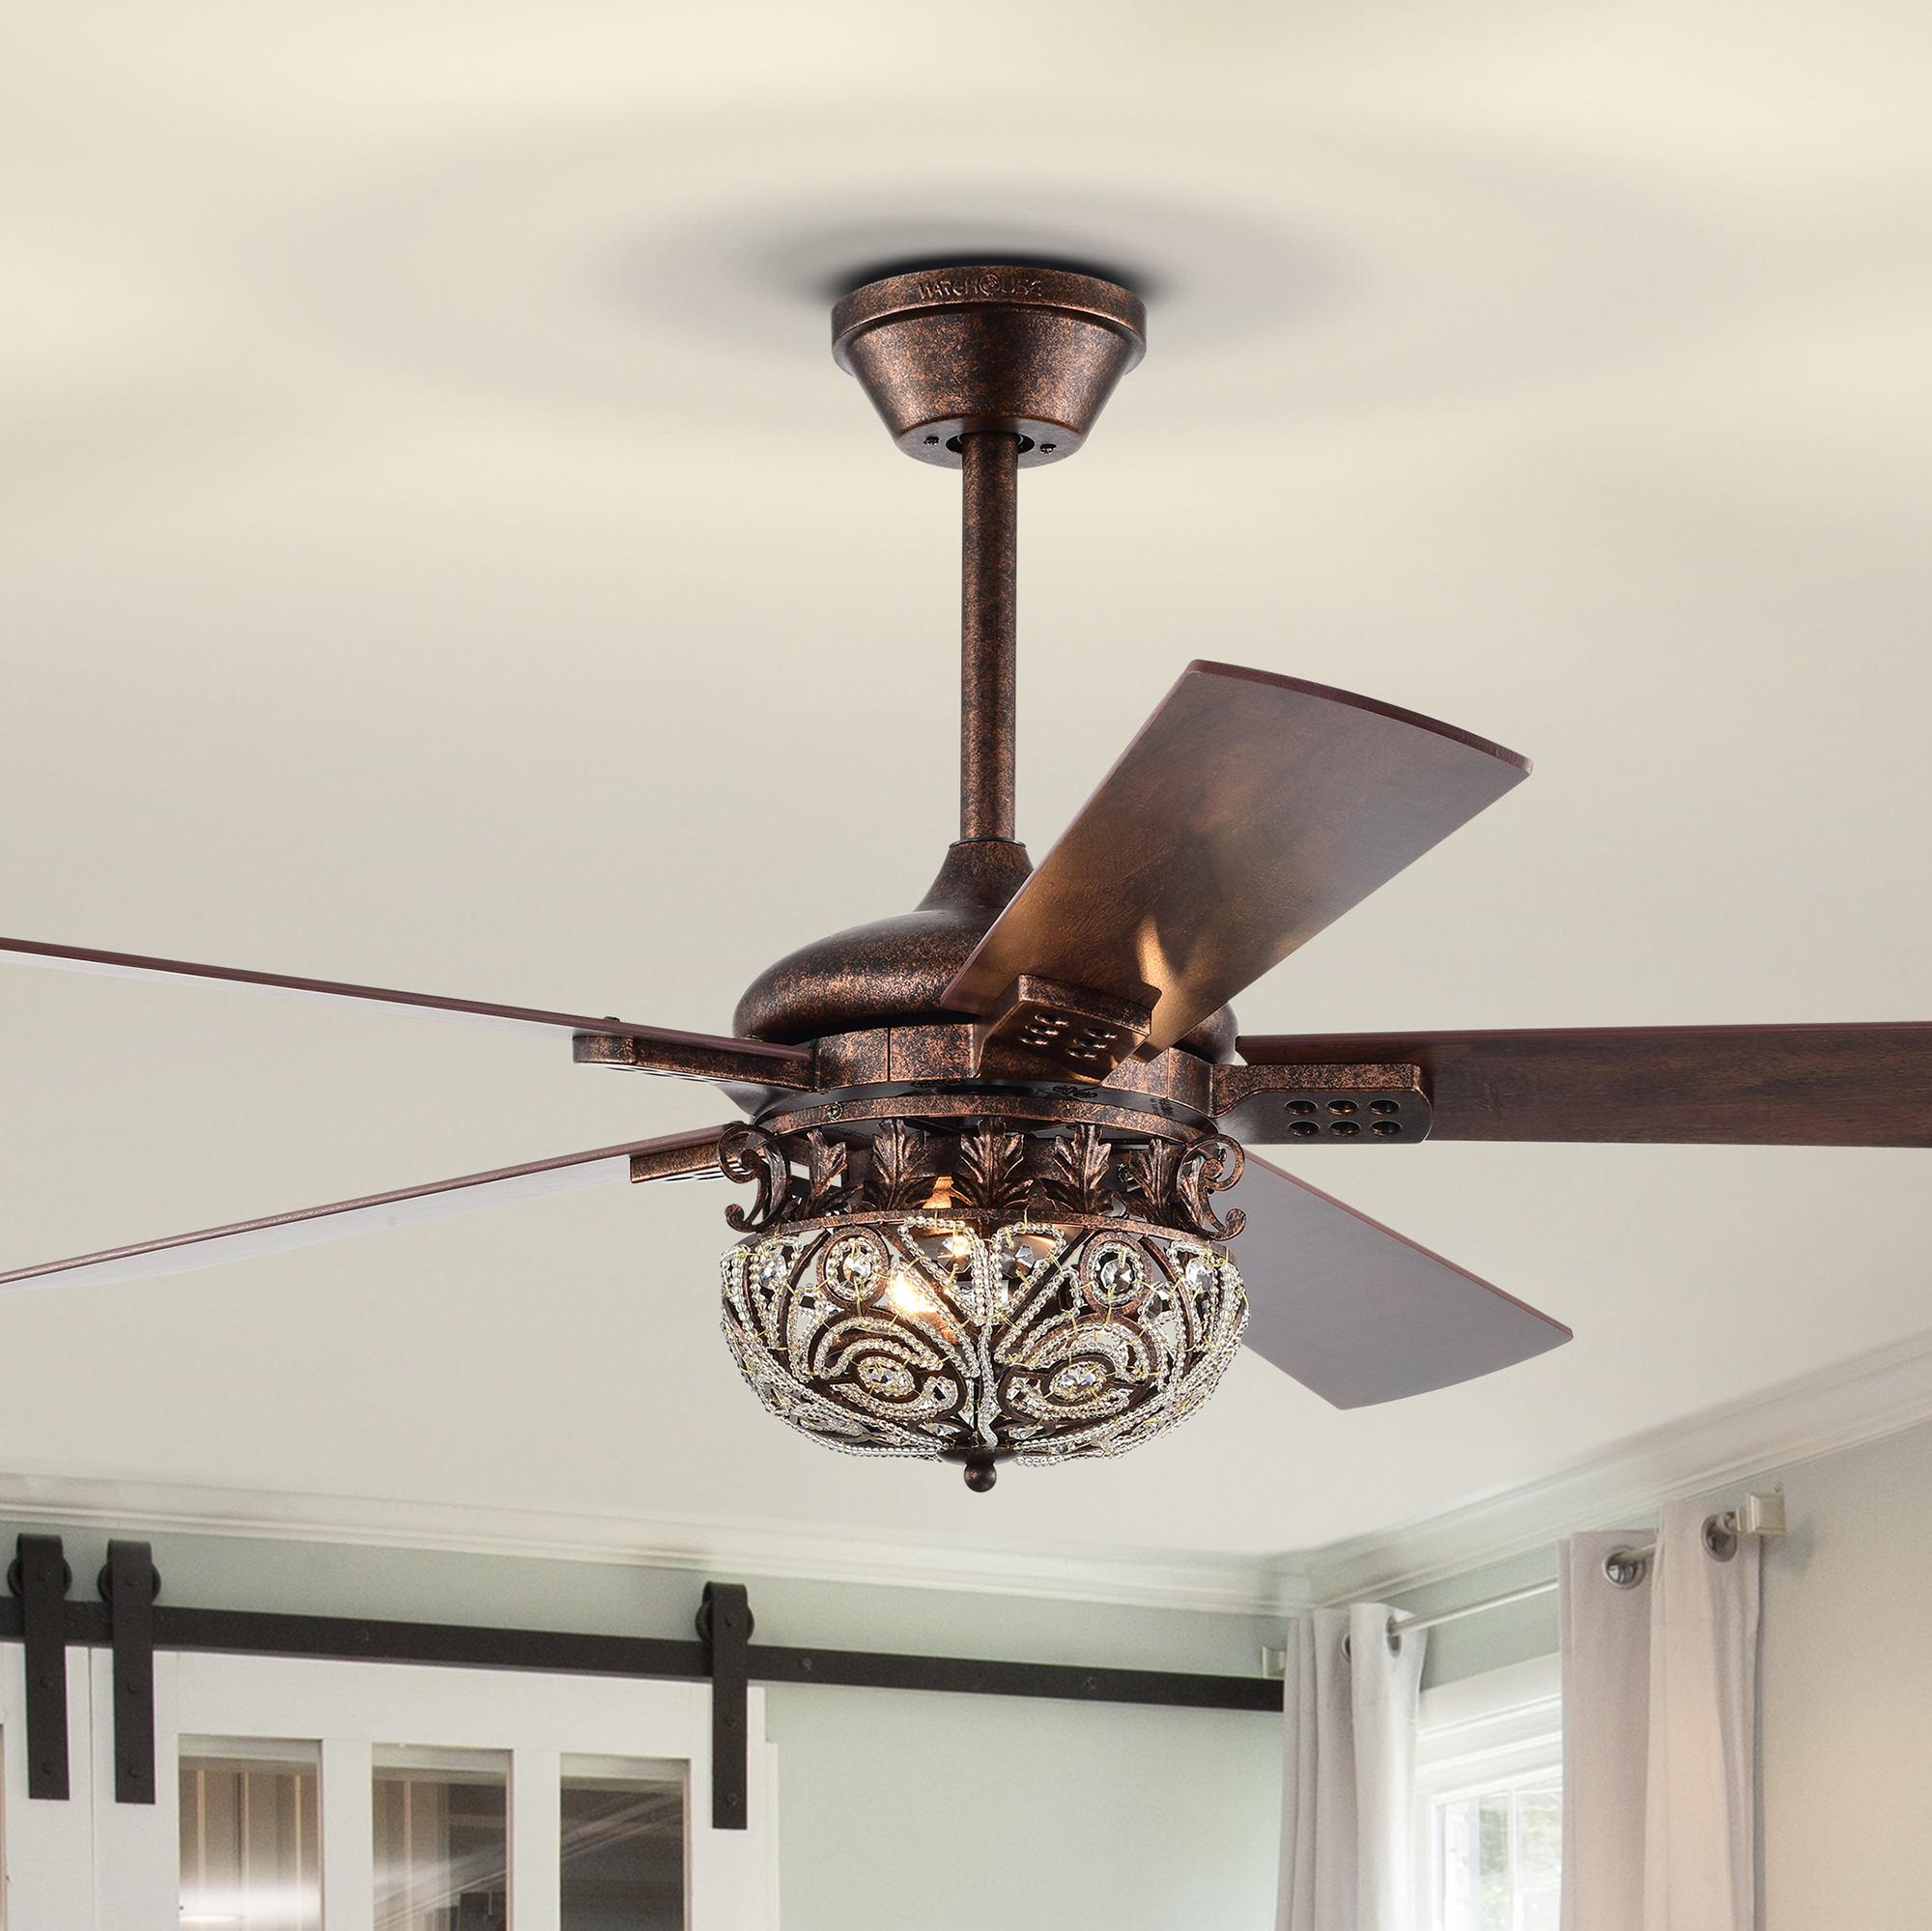 Picture of Warehouse of Tiffany AY14Y14AC 52 in. Laylani 2-Light Indoor Antique Copper Ceiling Fan with Light Kit & Remote